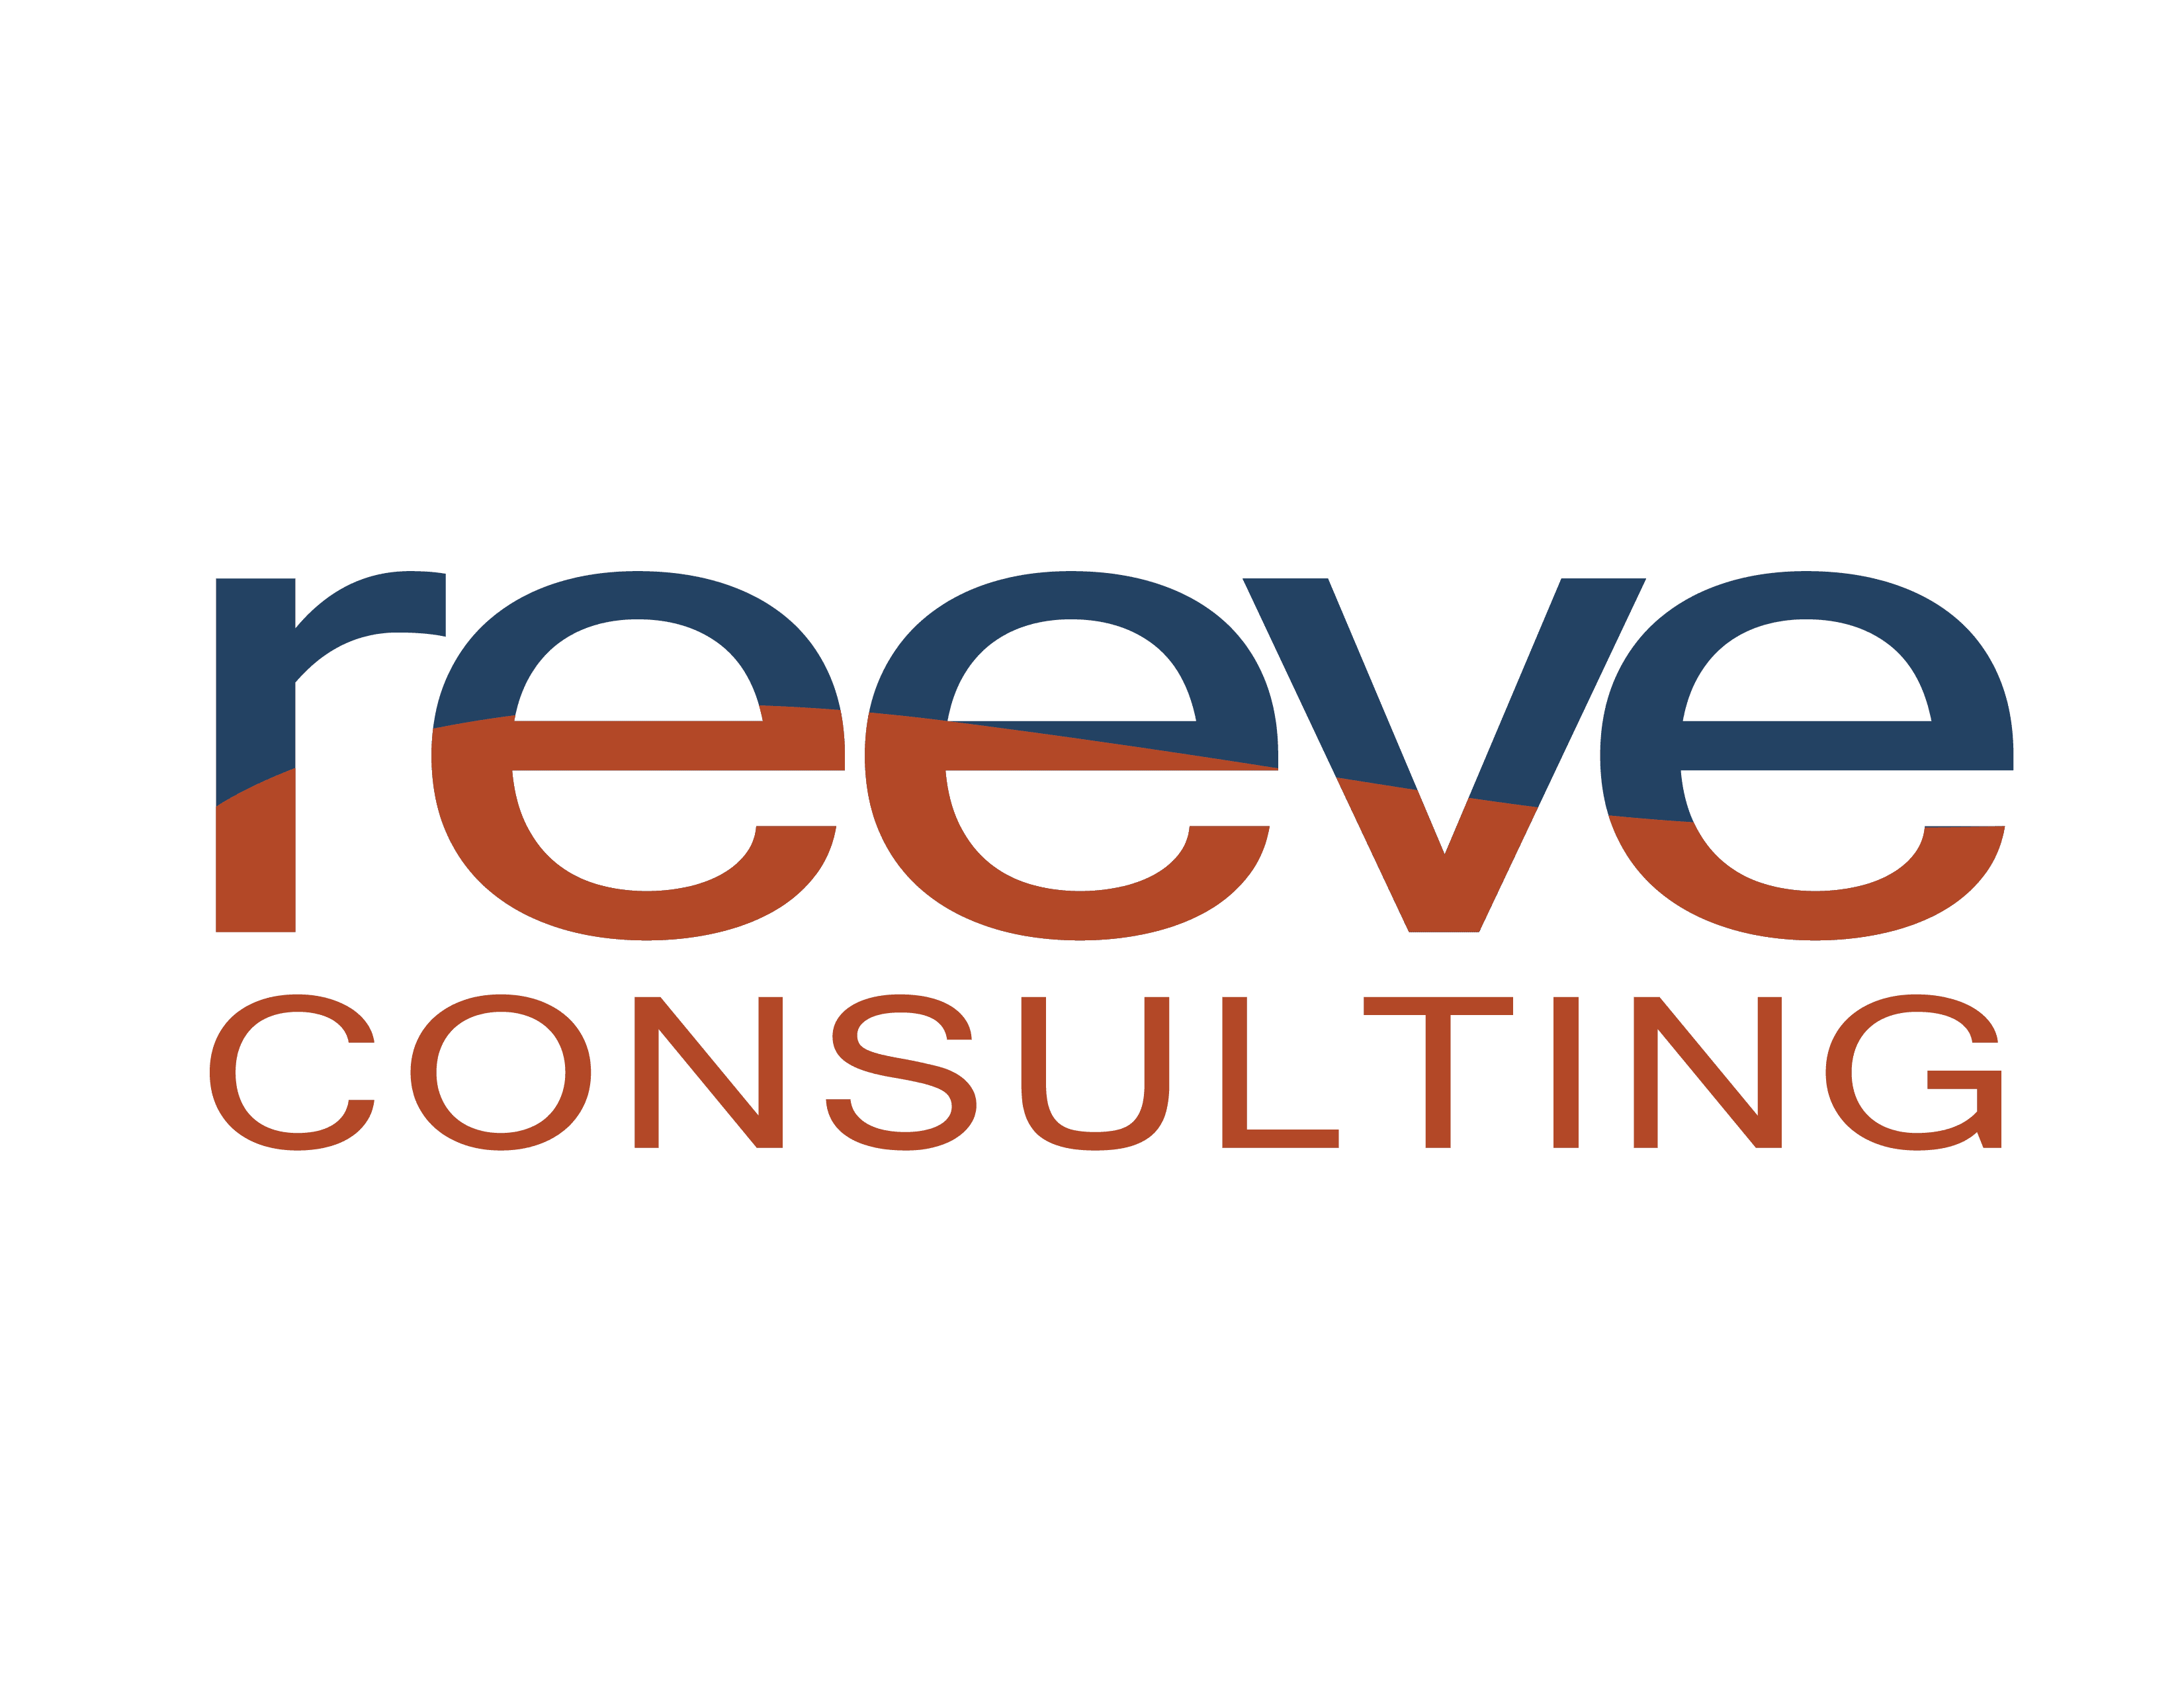 reeve consulting logo